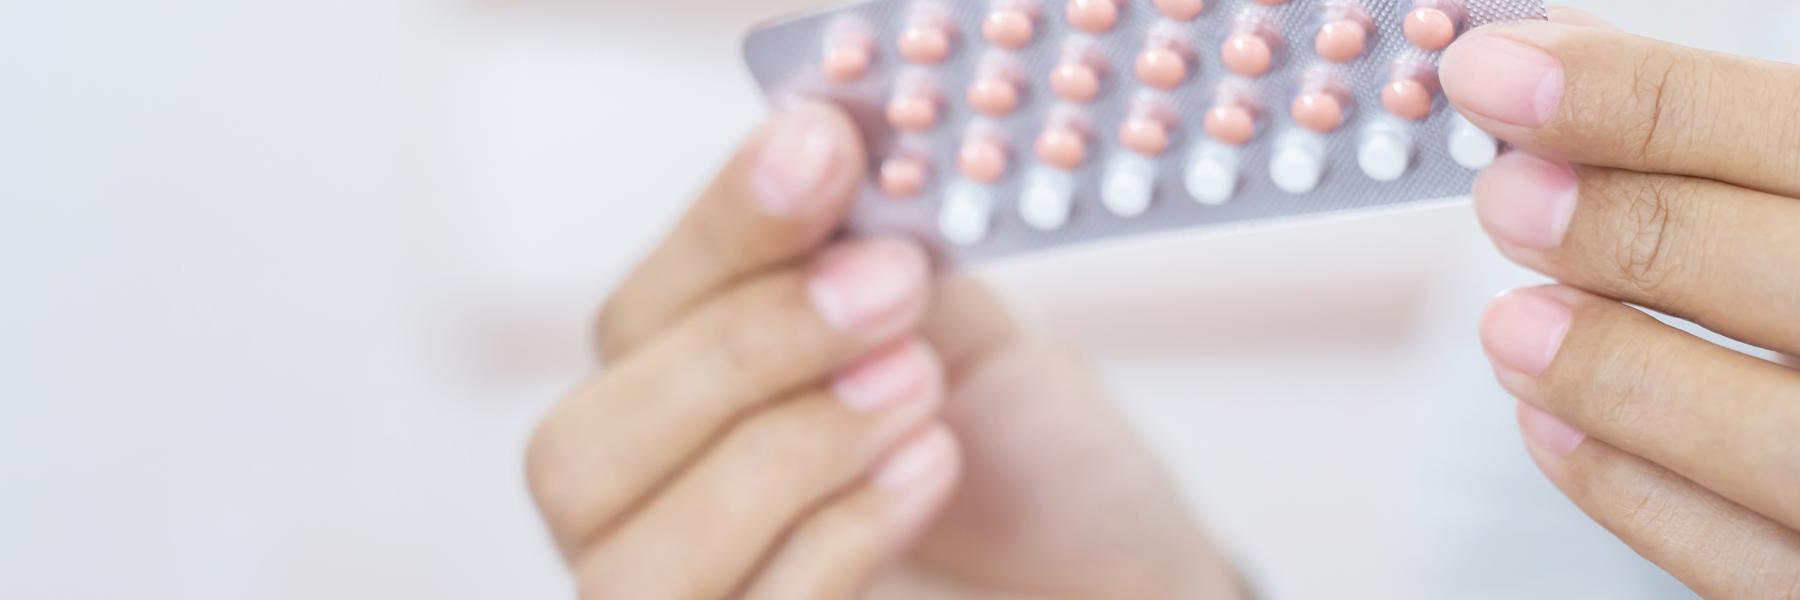 Girl holding combined oral contraceptive pill